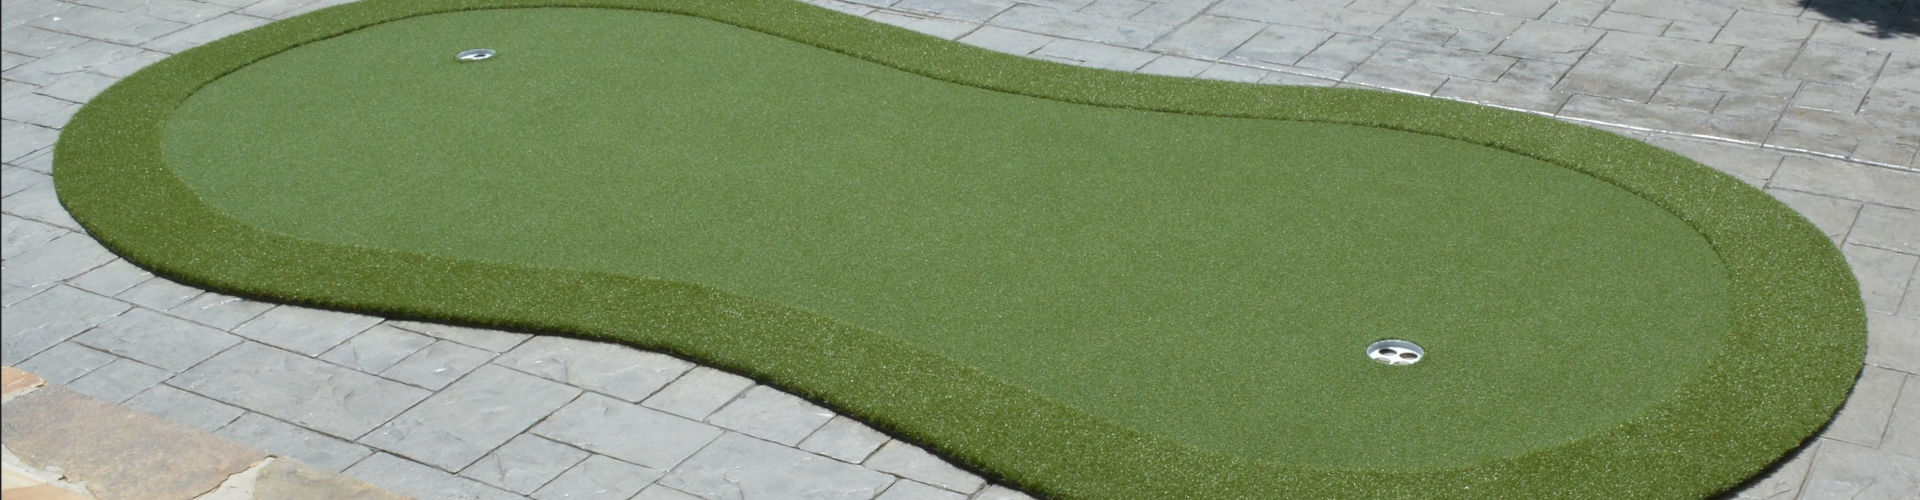 Southwest Greens of Augusta Portable Putting Green